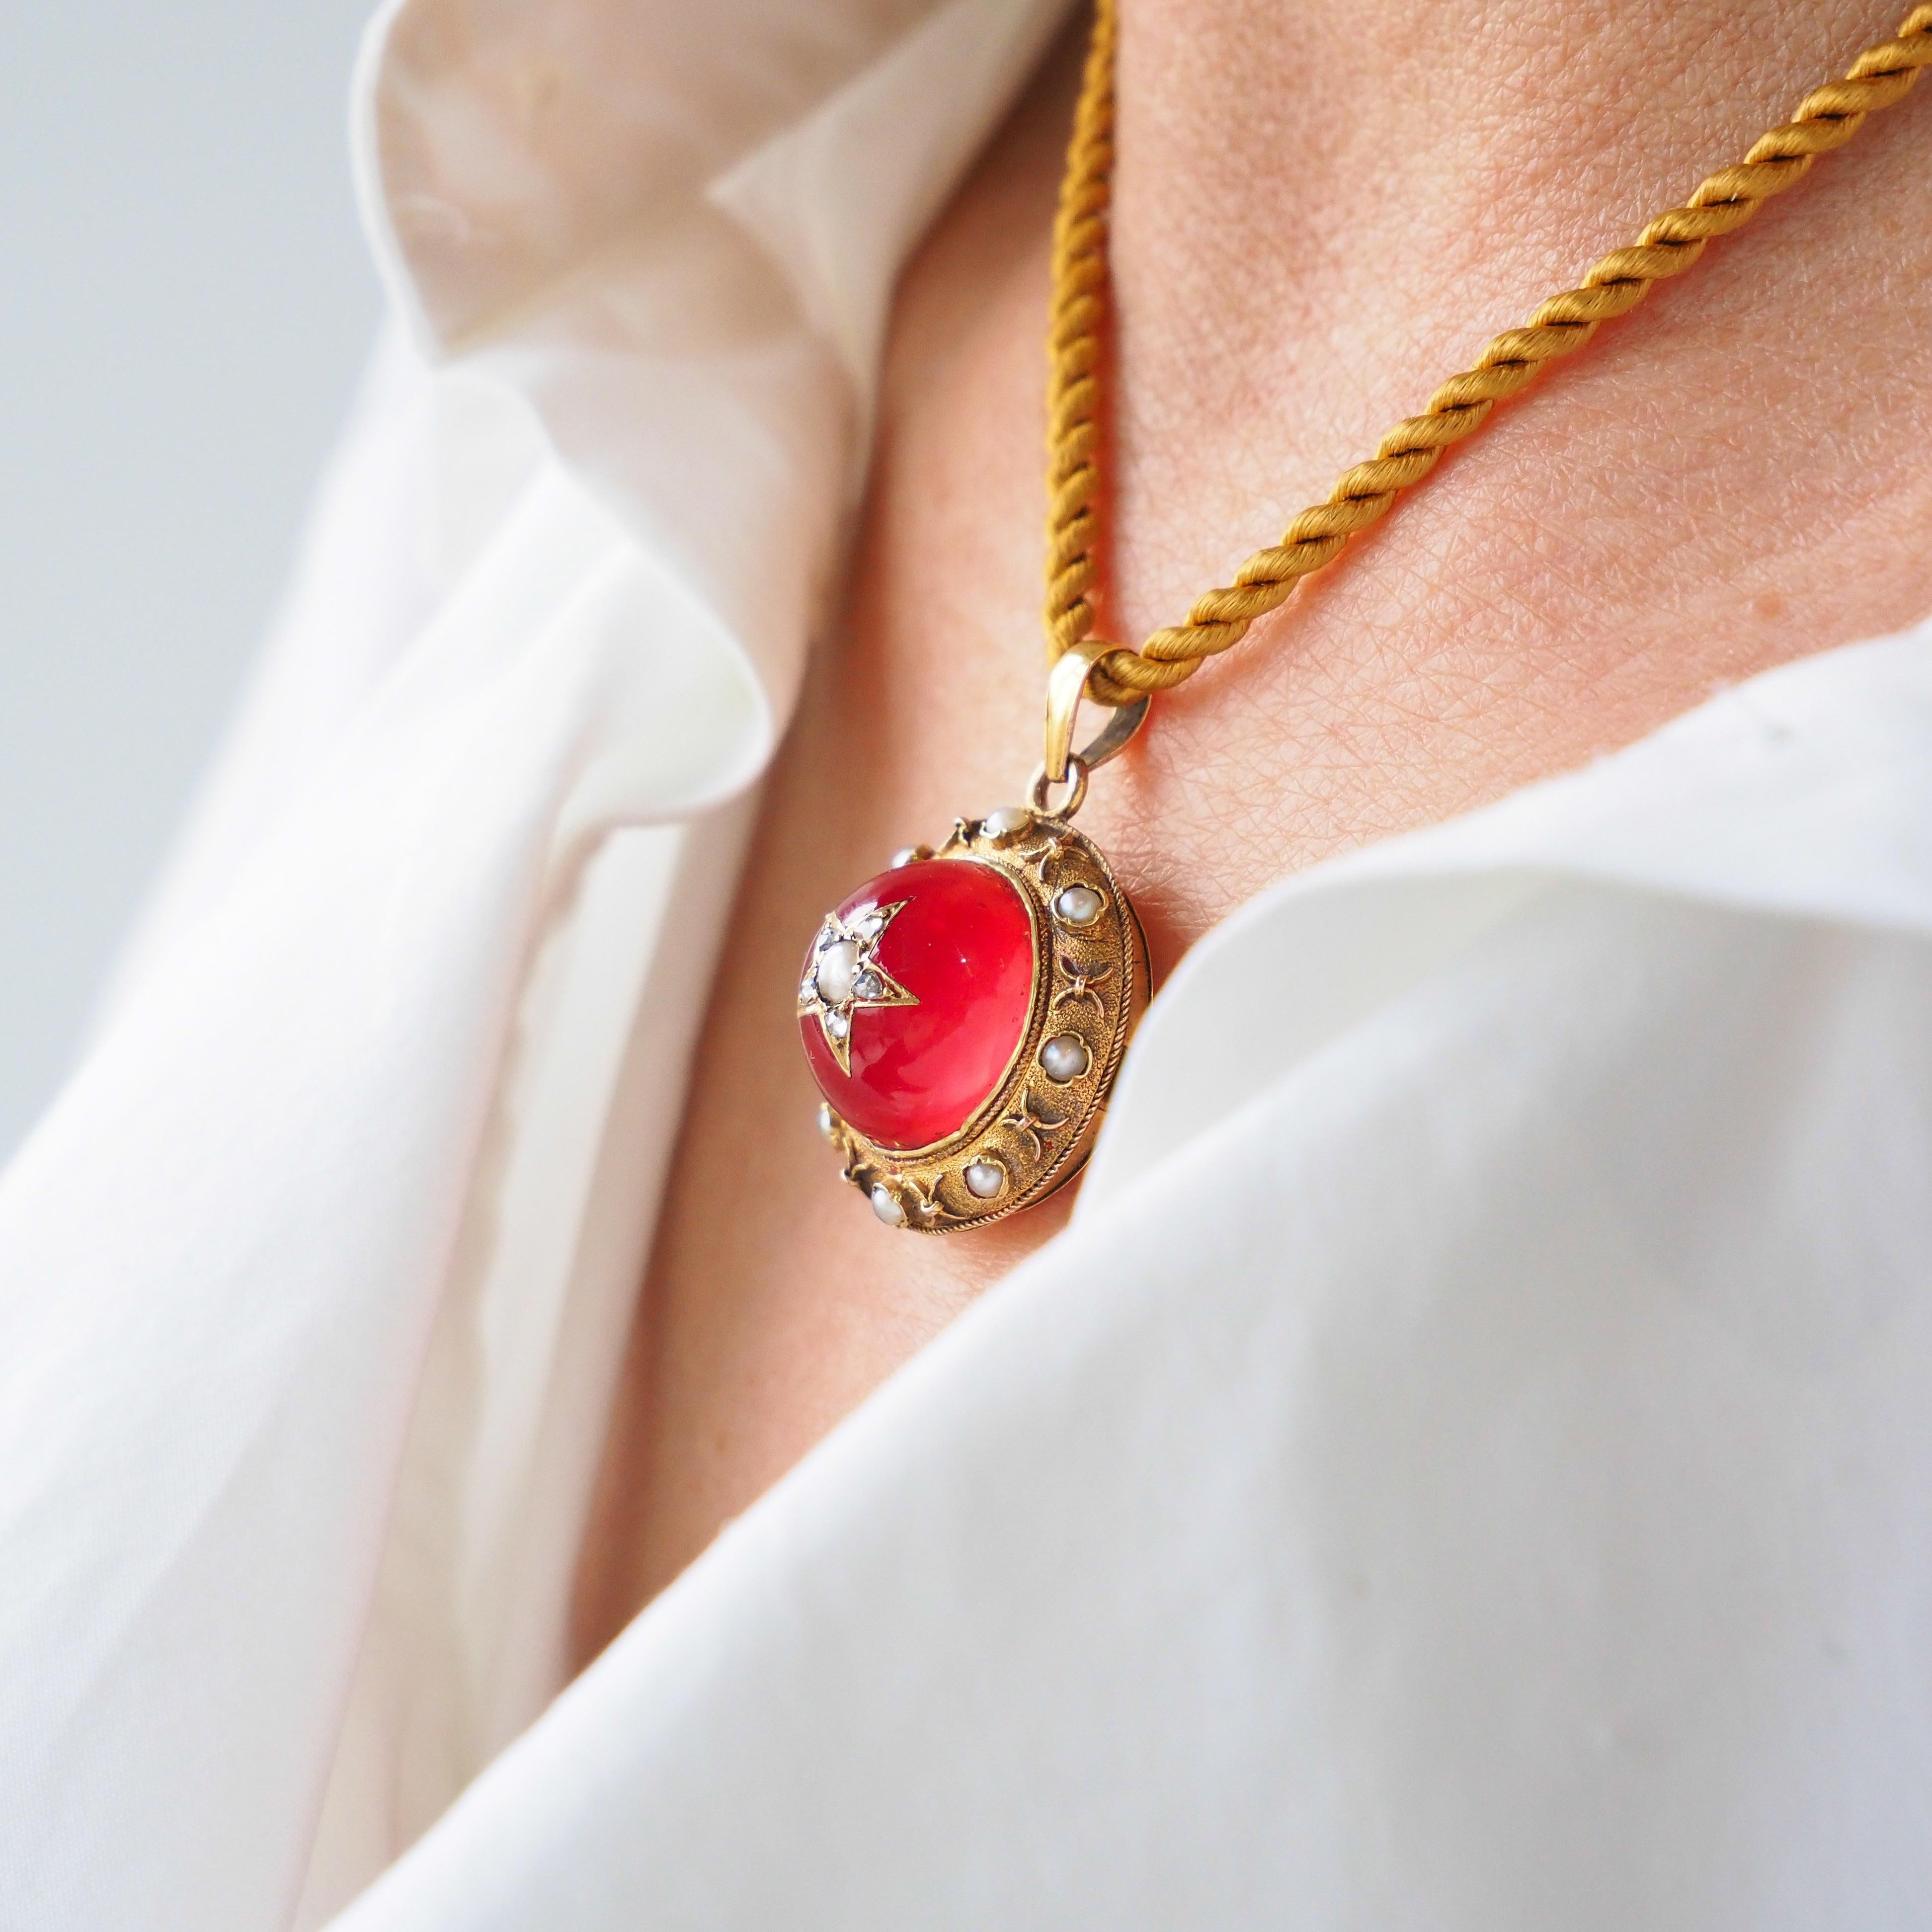 We are delighted to offer this striking antique Victorian red rock crystal cabochon pendant necklace made with 15ct solid gold in the Victorian era, c.1880. (Please note the photographed box is solely for display purposes only. Unfortunately, it